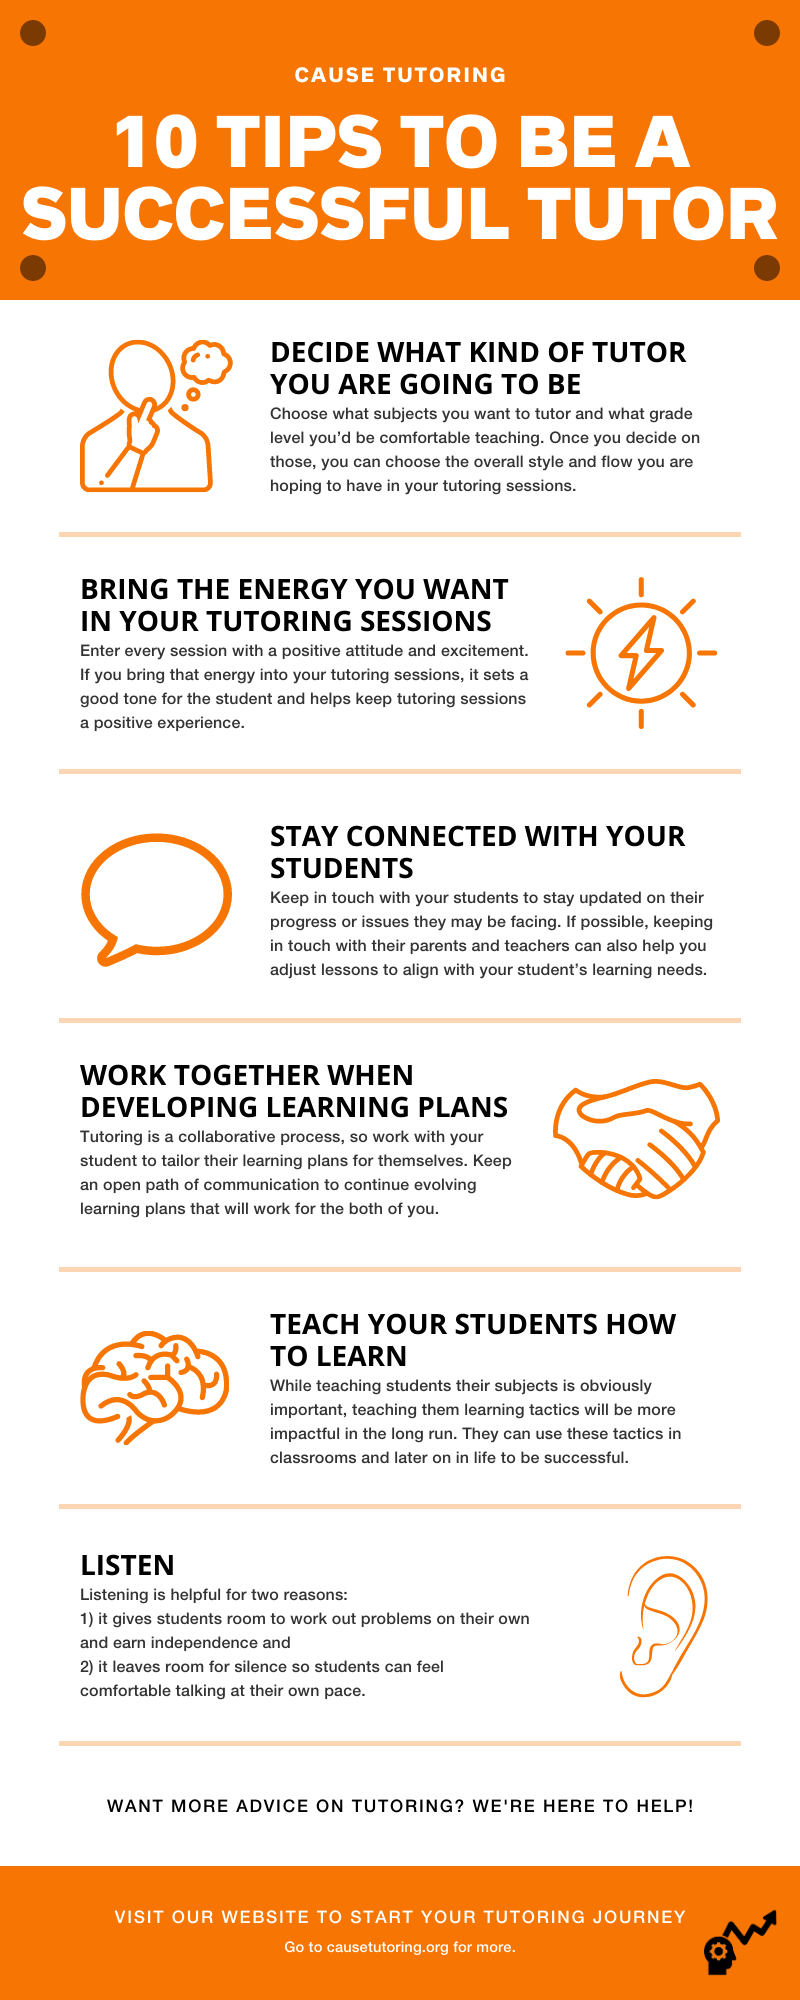 10 tips to be a successful tutor